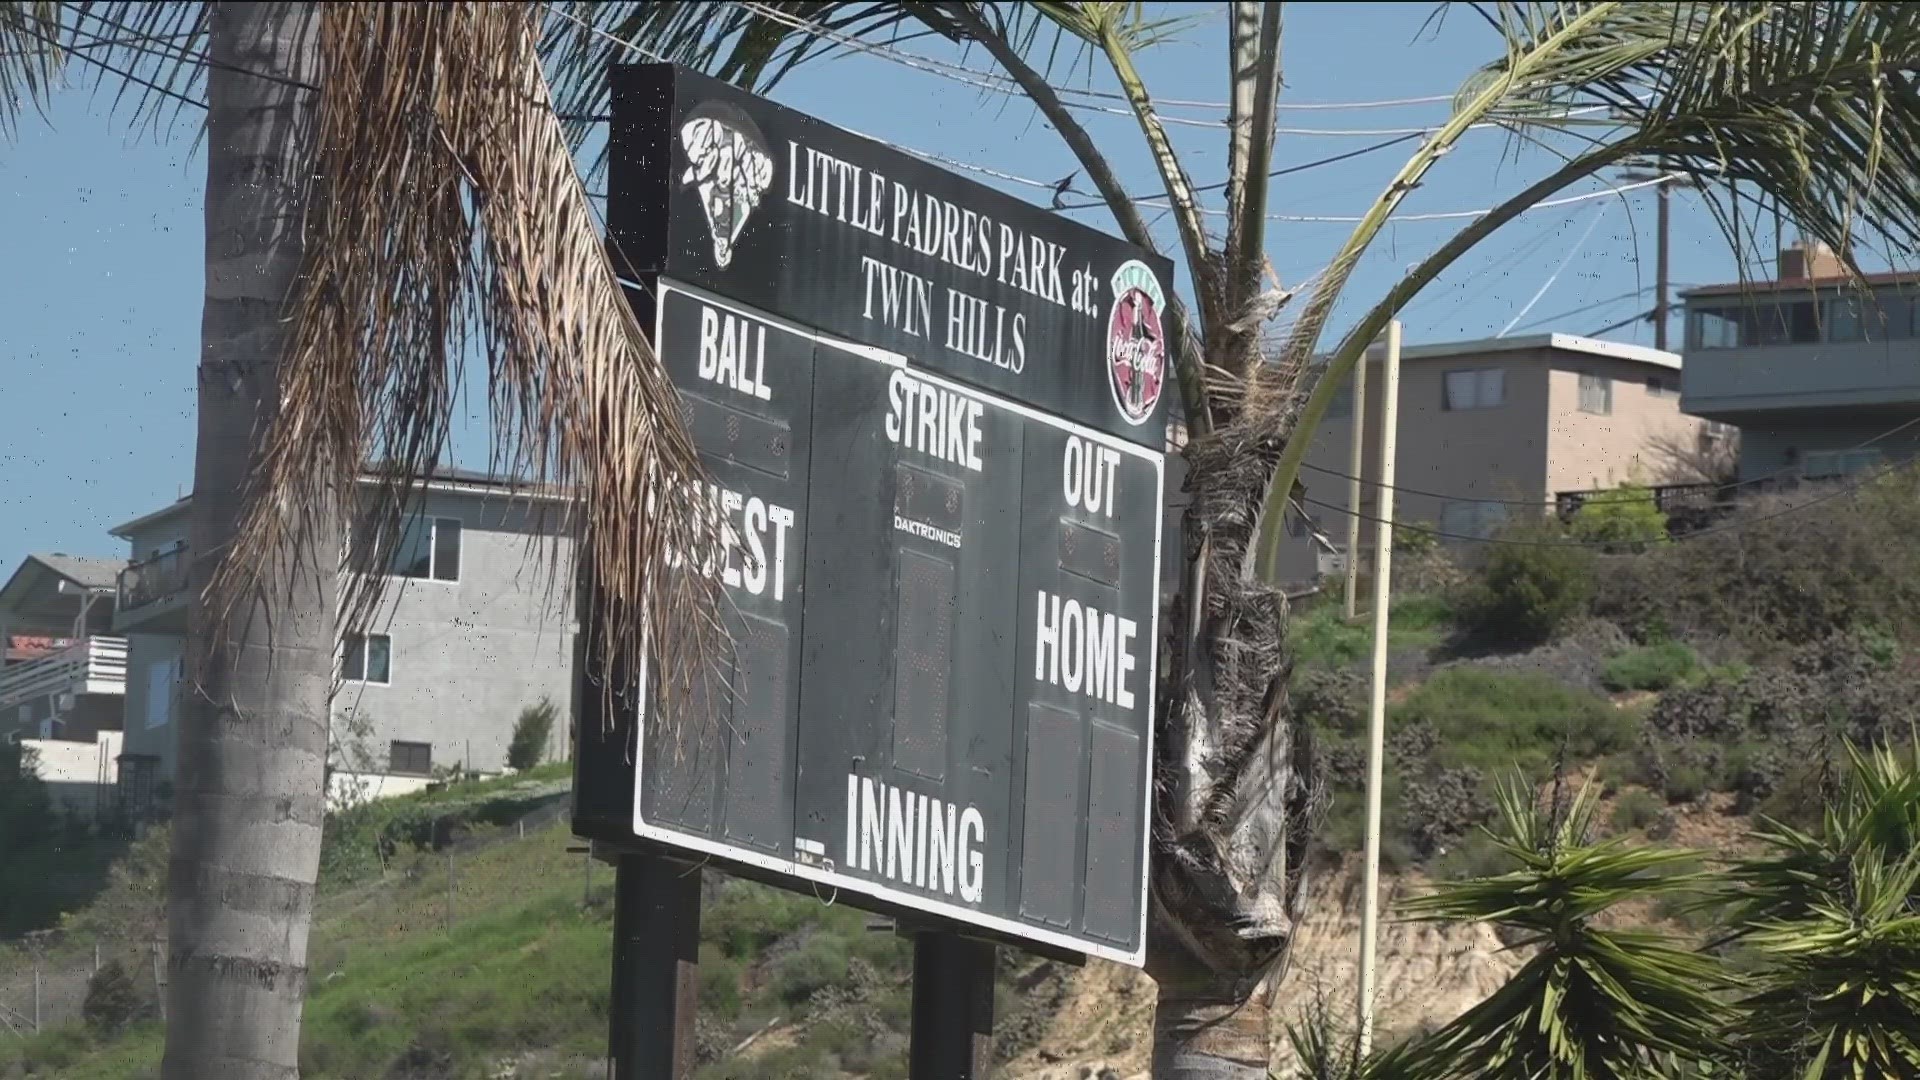 It's the only little league field where kids from the Paradise Hills neighborhood can practice, and fixing it could cost thousands of dollars.